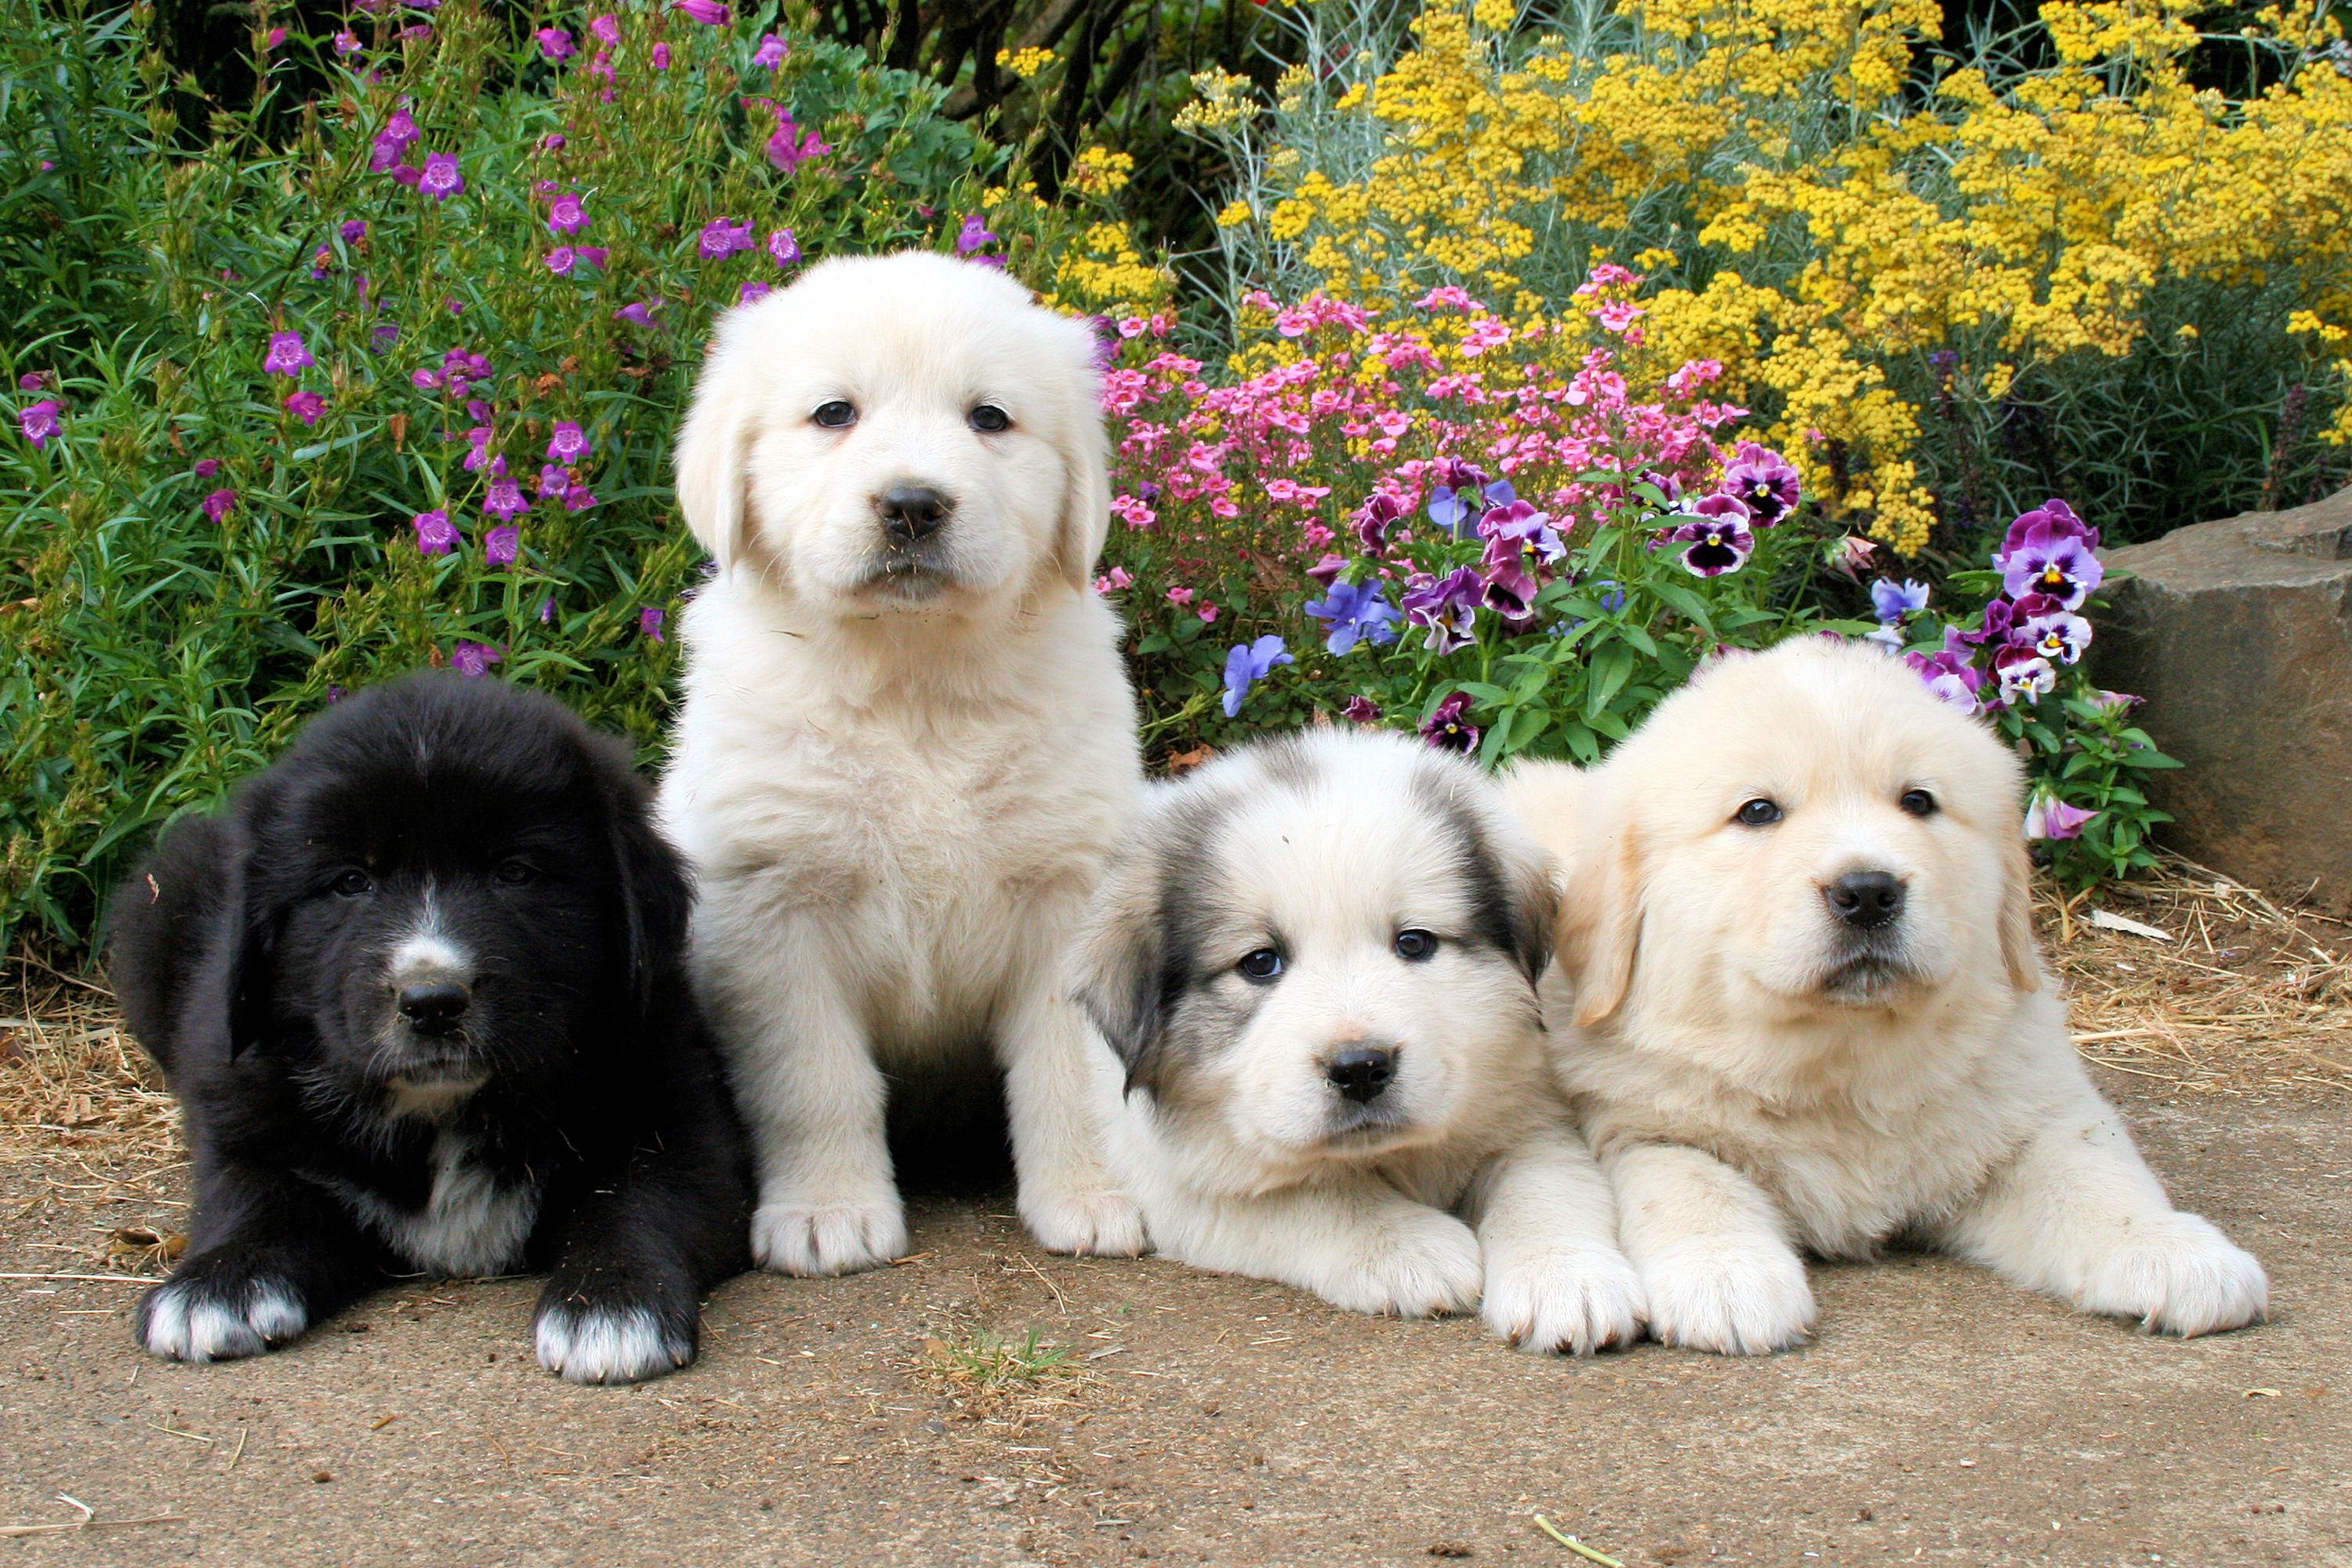 Wallpaper. Animals. photo. picture. dogs, puppies, spring, flowers